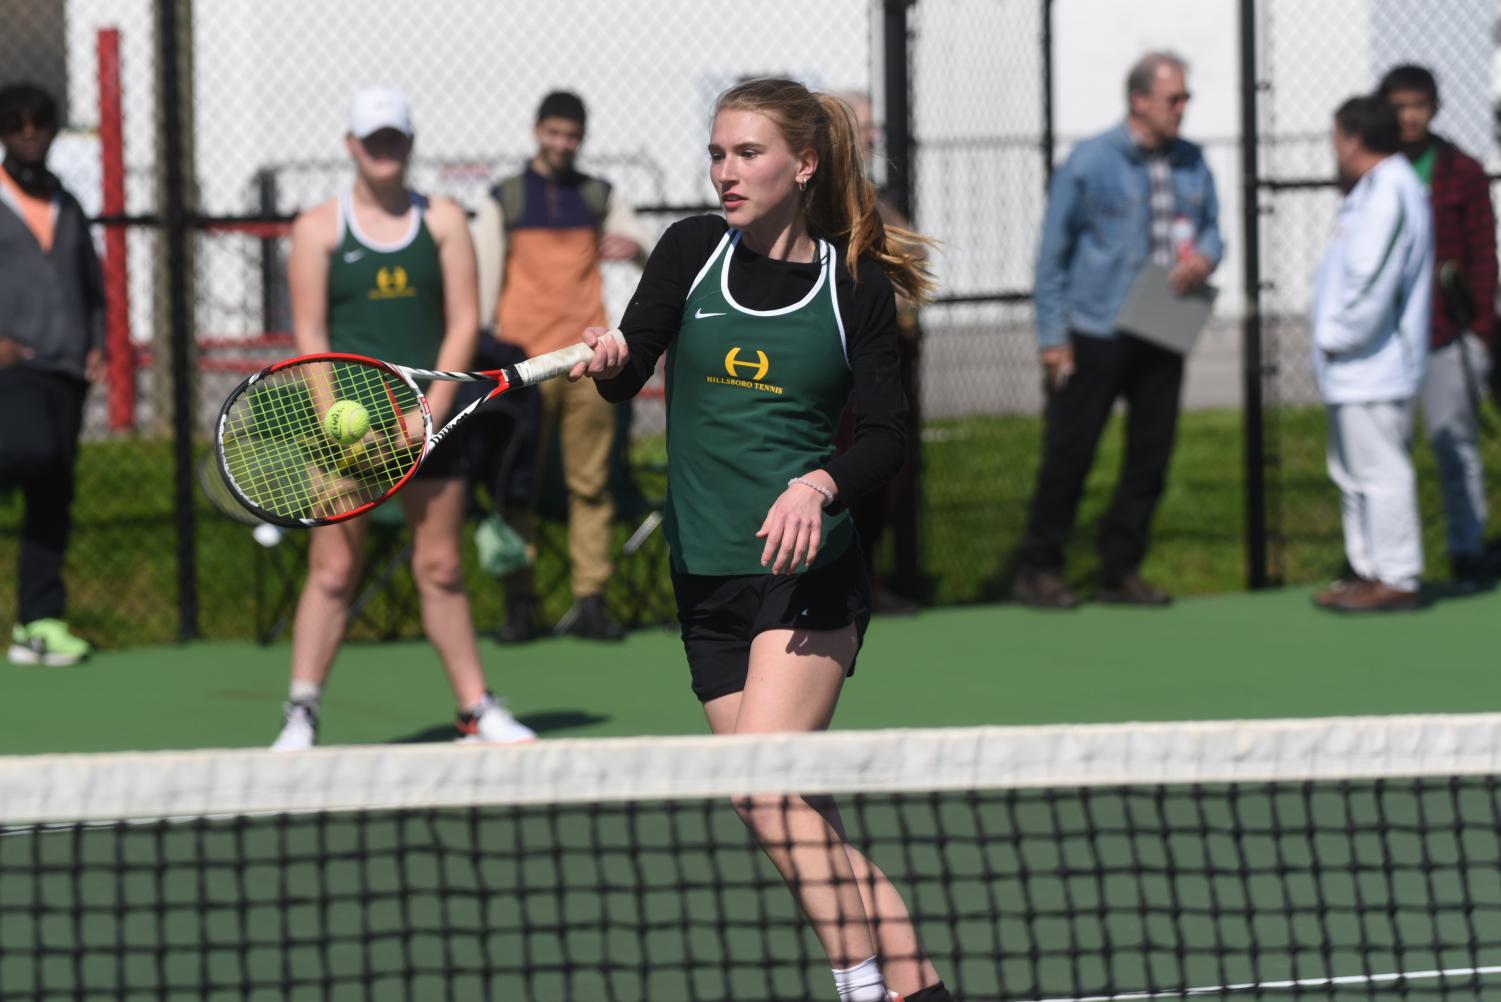 Burros+Tennis+Season+with+strong+sets+and+2-0+District+play